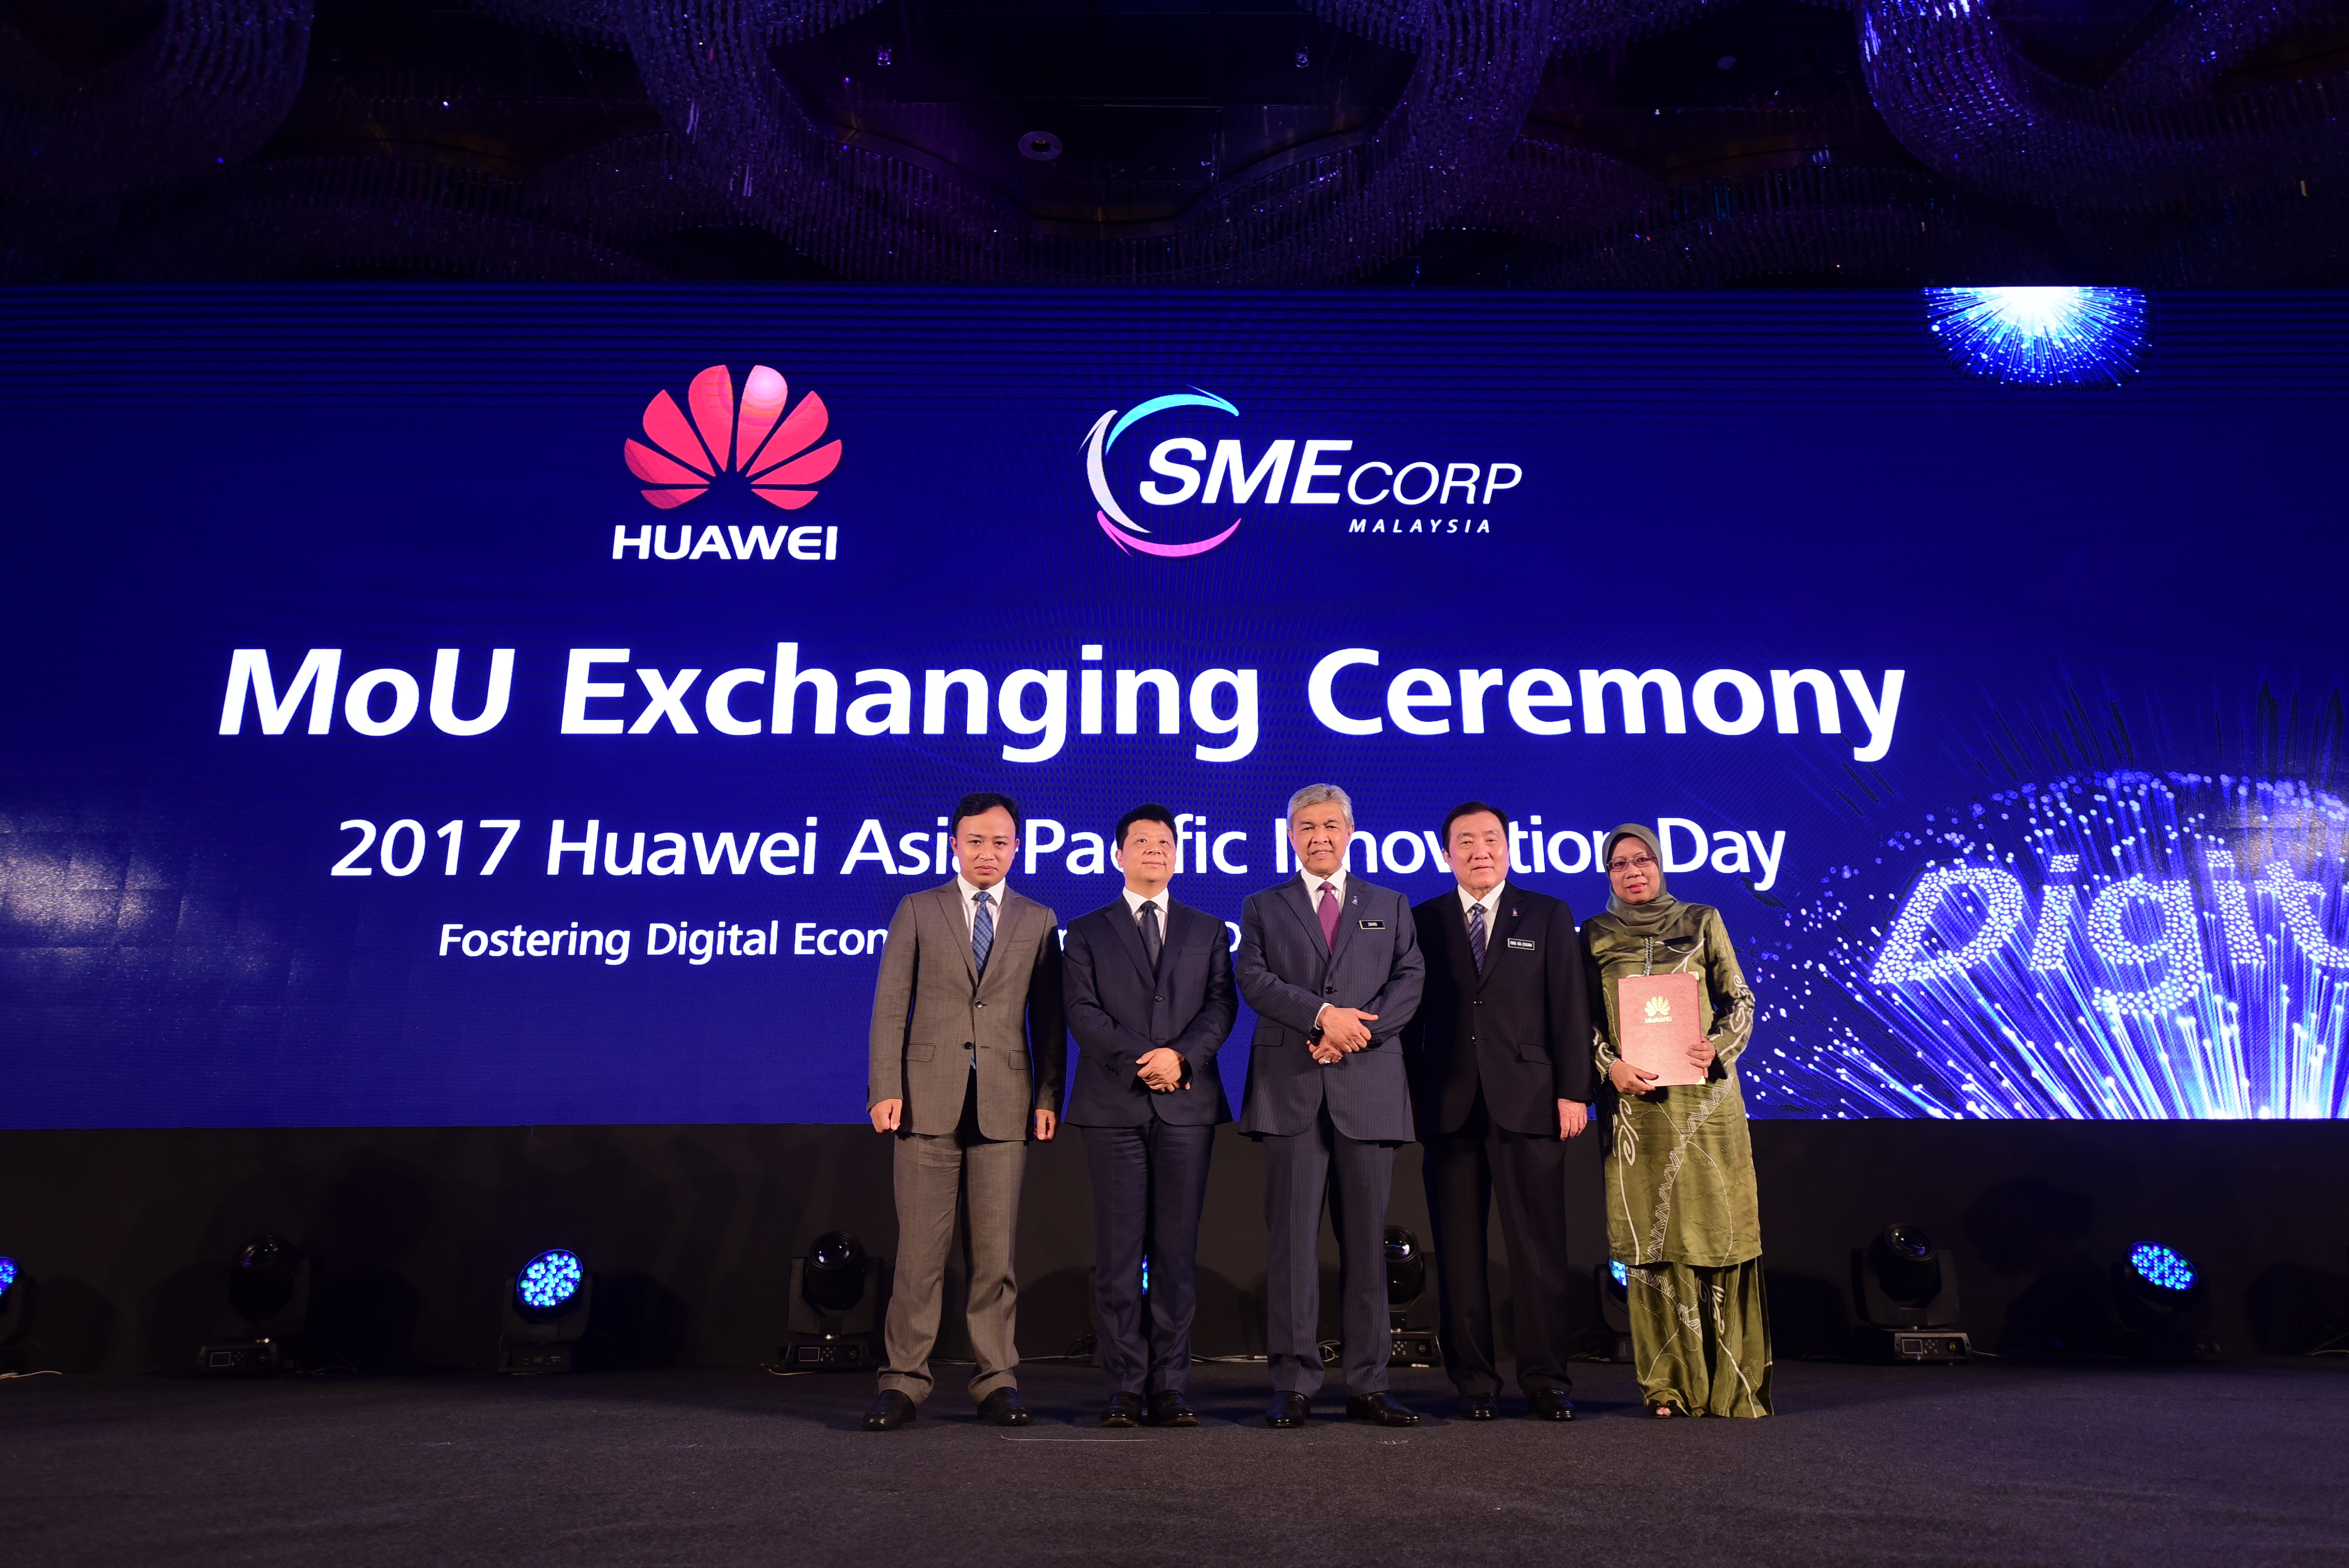 Sme Corp Malaysia Partners With Huawei To Bring Smes To The Forefront Of A Digital Economy